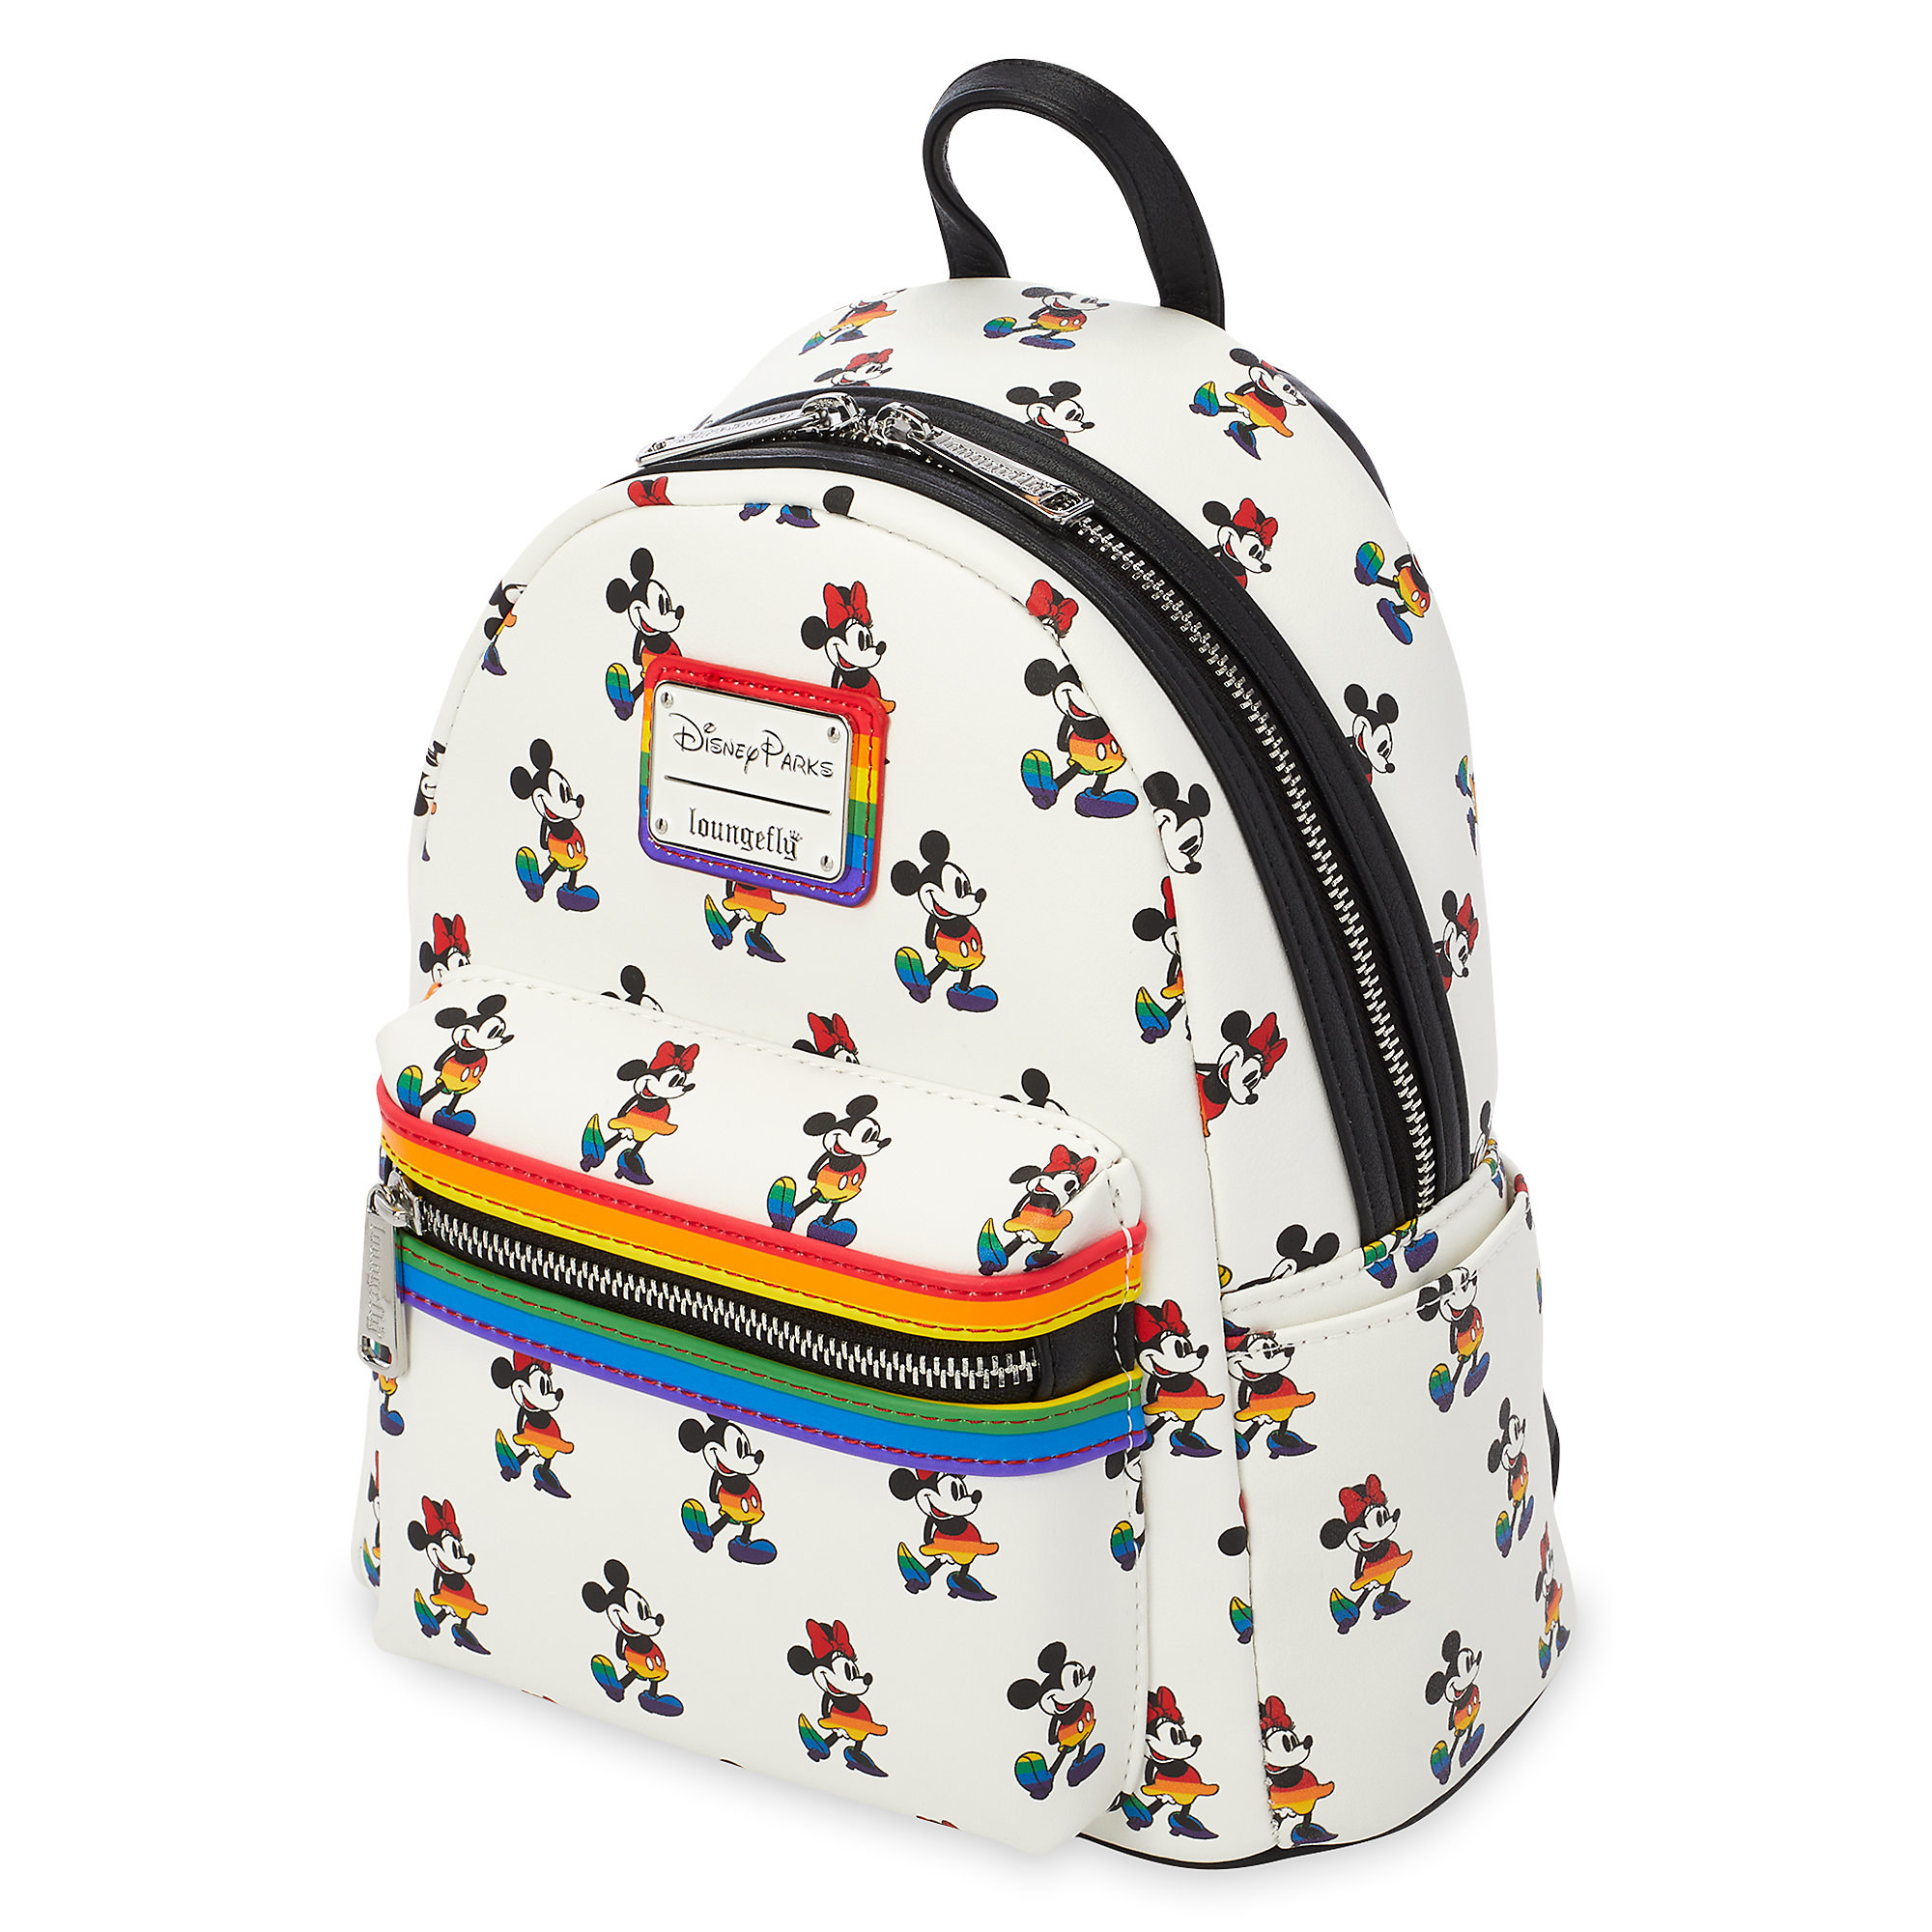 Disney Parks Rainbow Collection Pride Cinch Sack Tote Love Comes In Every Color